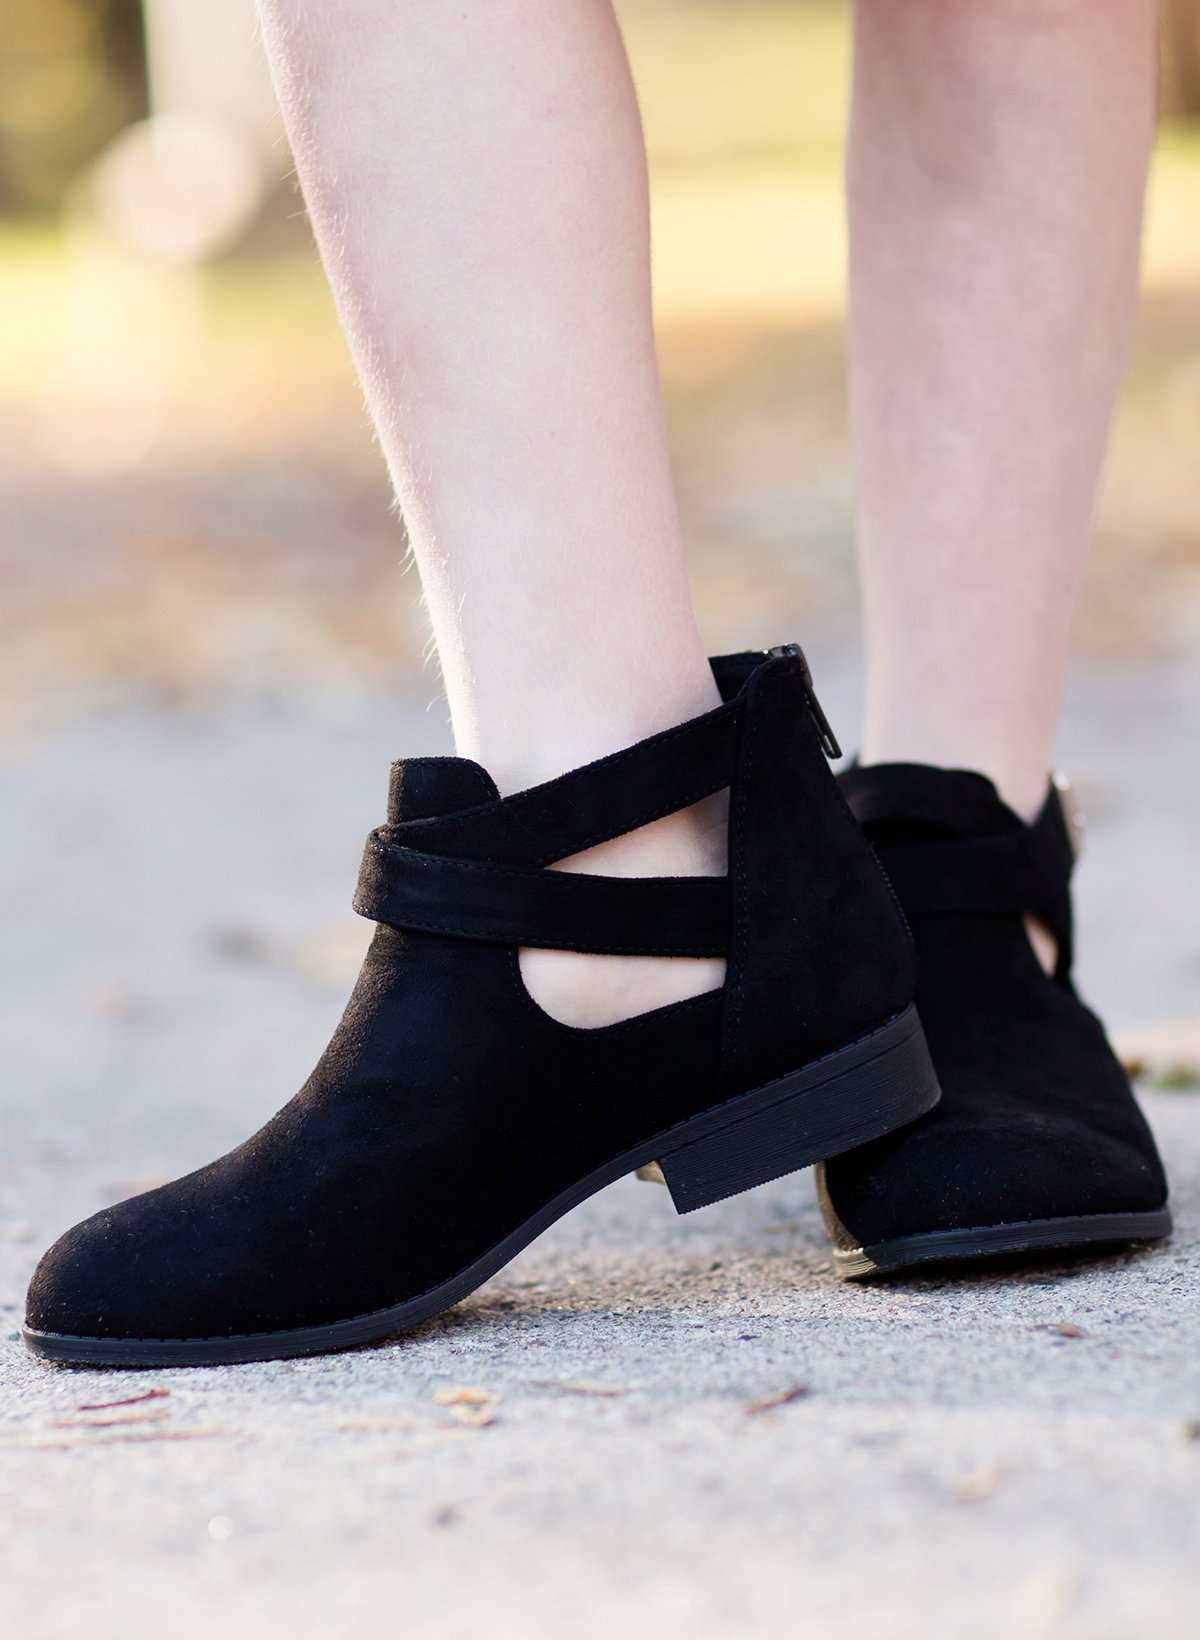 Girls modest black and mauve ankle boots with side cut outs and silver buckles with a 3/4" heel.